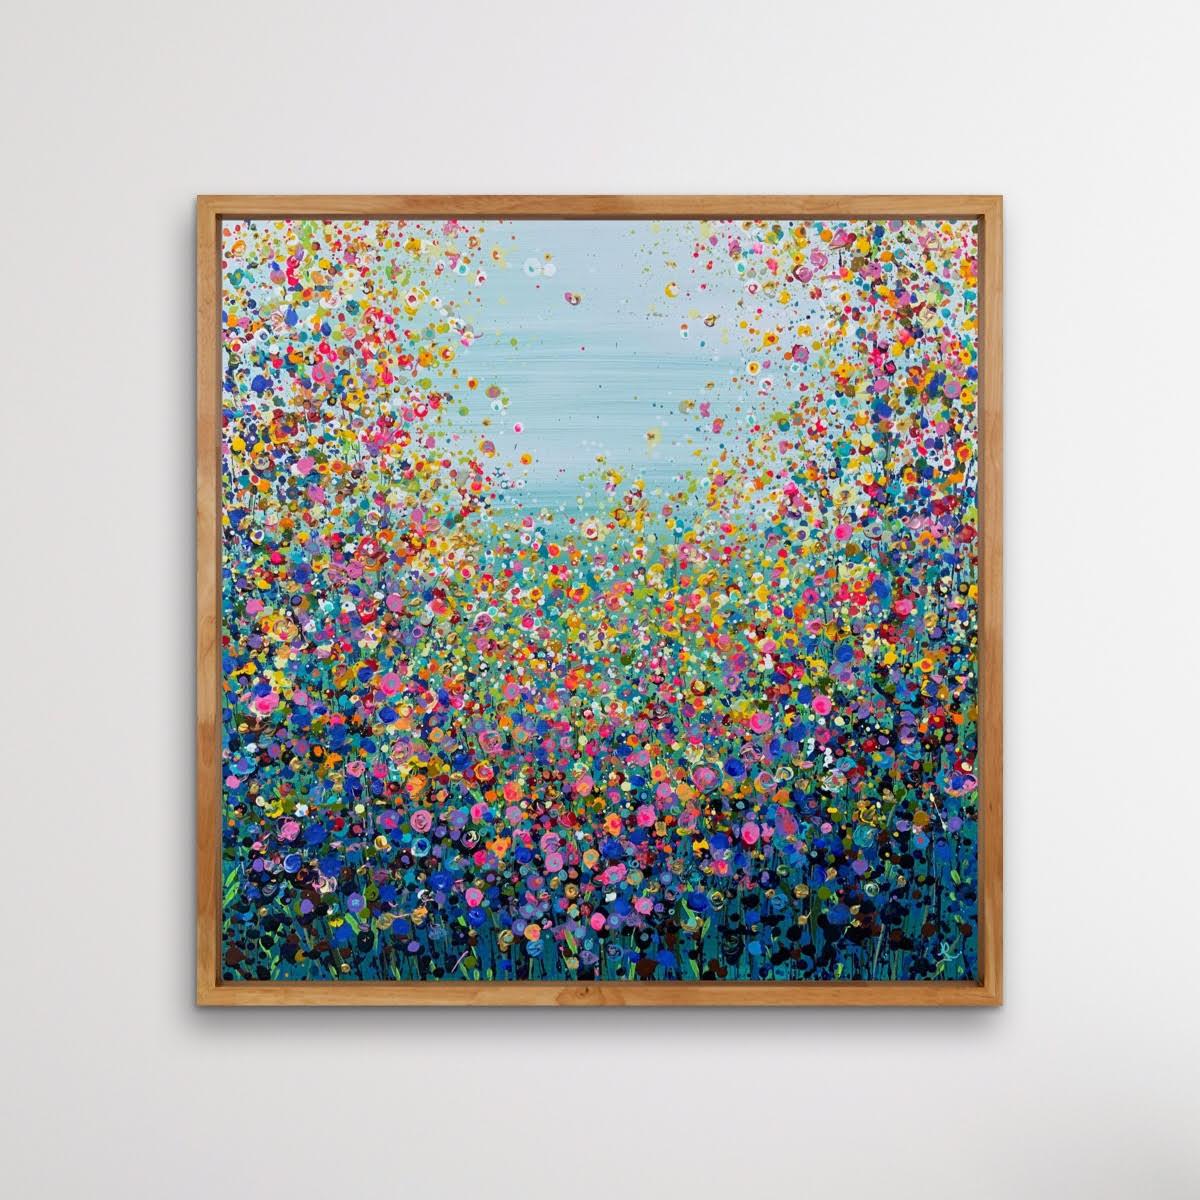 Meadow Mayhem by Jan Rogers [2022]
original and hand by the artist 
Acrylics on canvas
Image size: H:60 cm x W:60 cm
Complete Size of Unframed Work: H:60 cm x W:60 cm x D:2cm
Sold Unframed
Please note that insitu images are purely an indication of